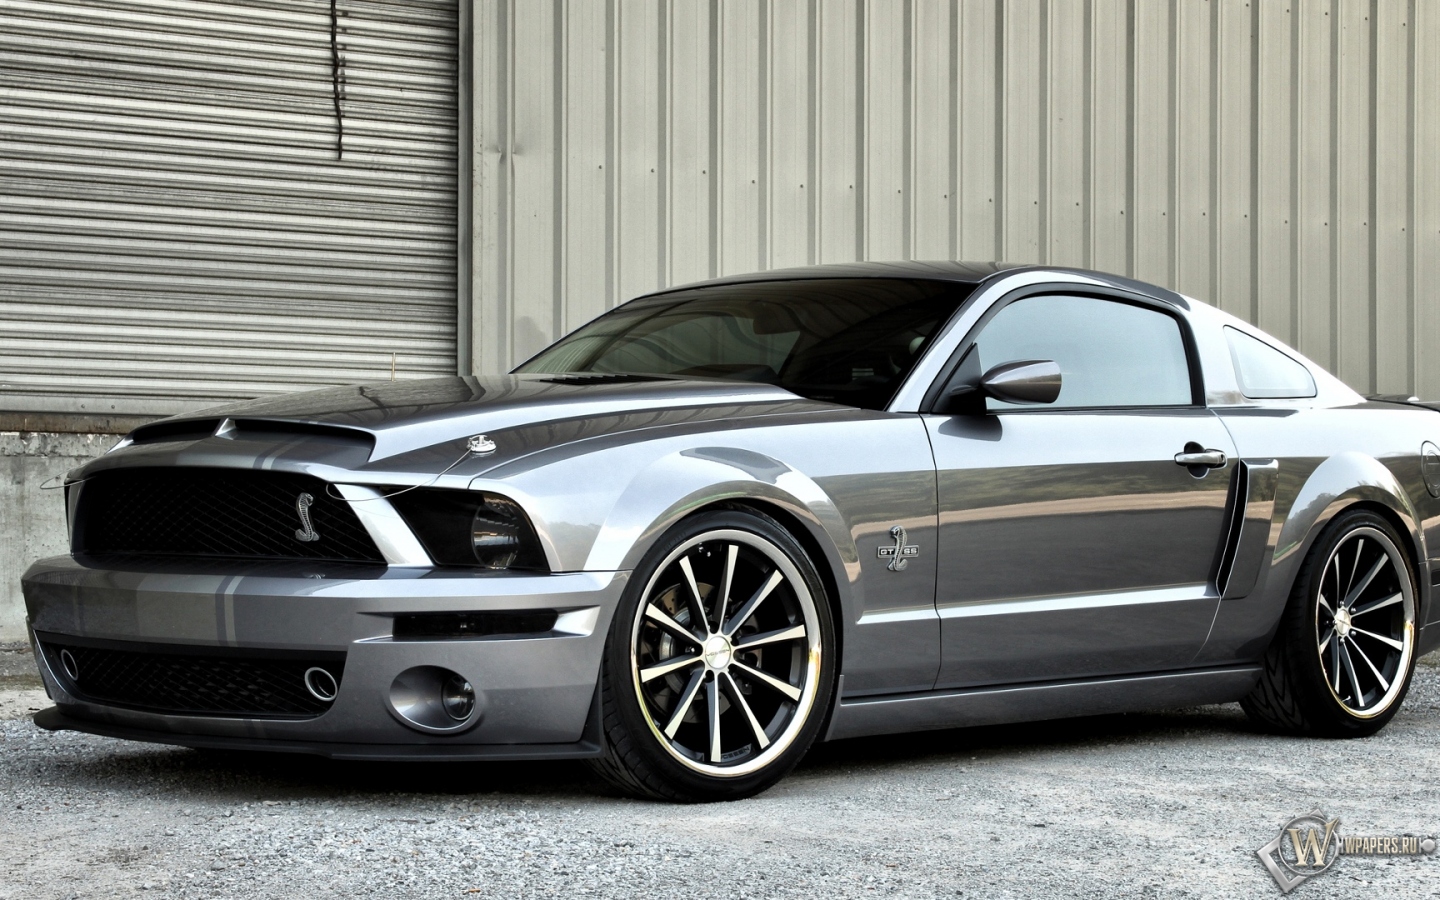 Ford Mustang Shelby GT500 1440x900